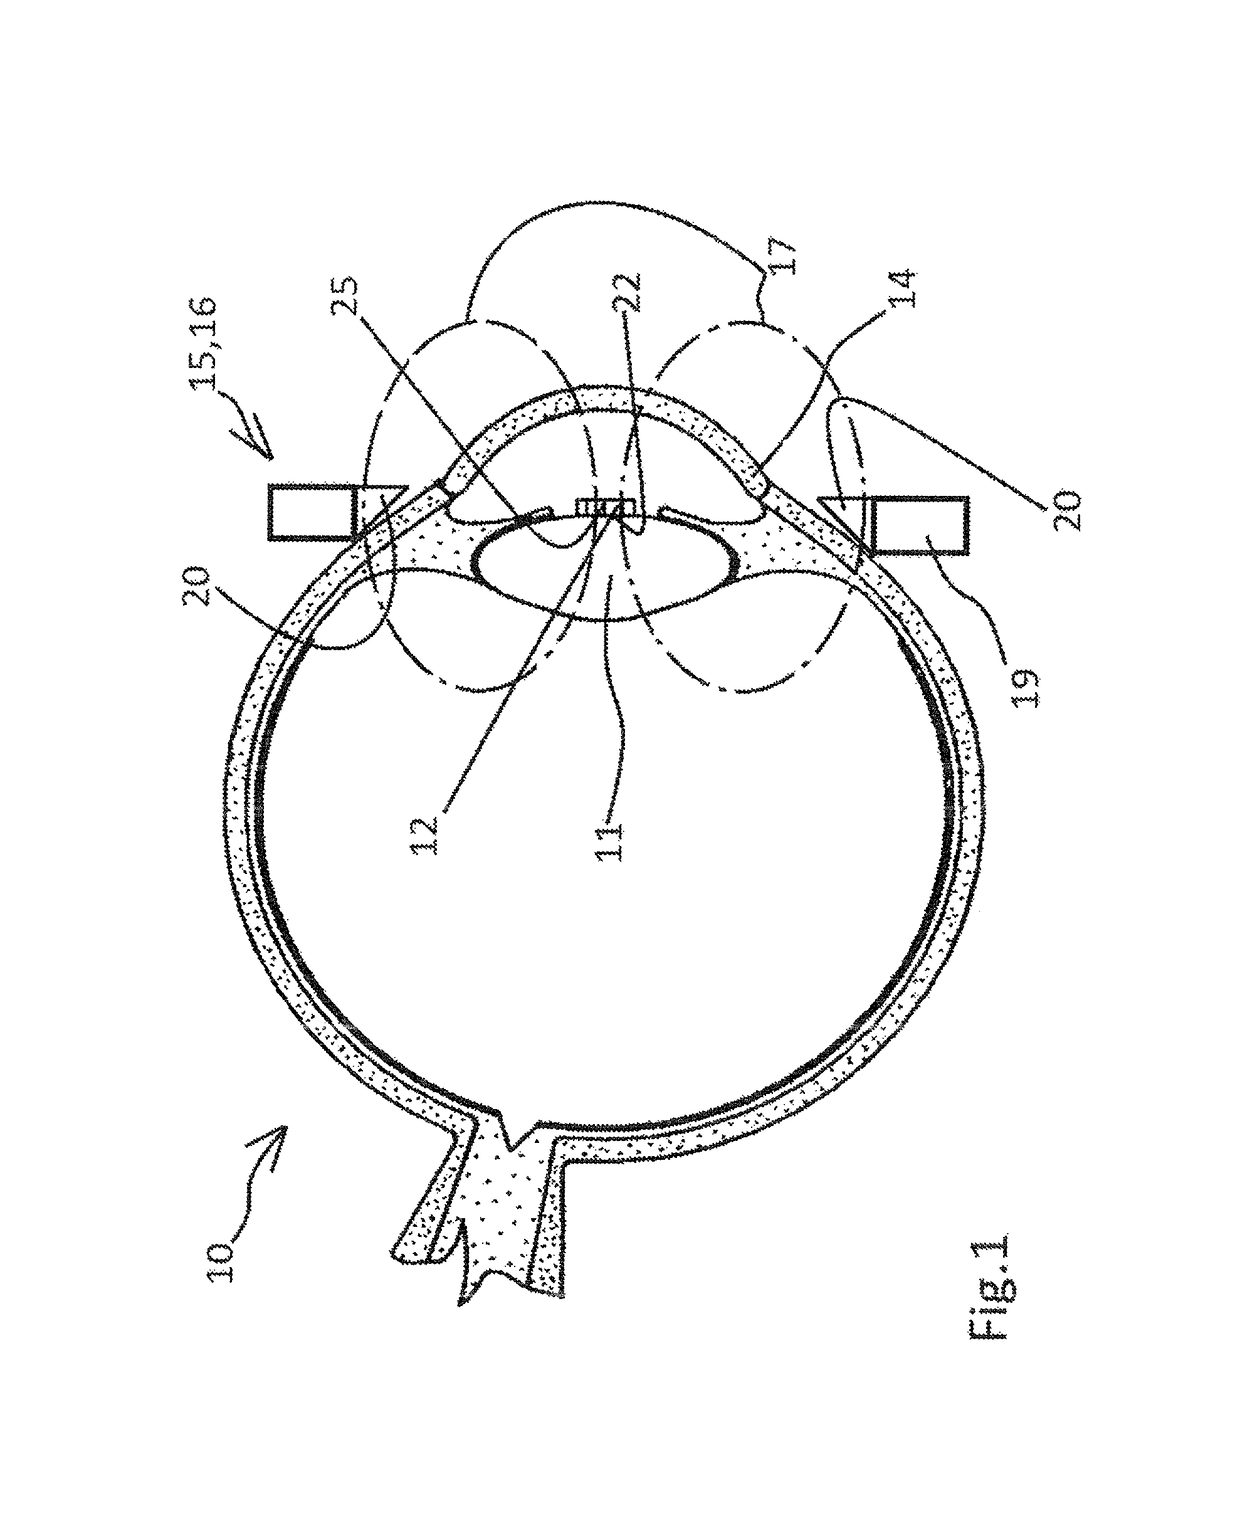 Device for producing cuts or perforations on an eye